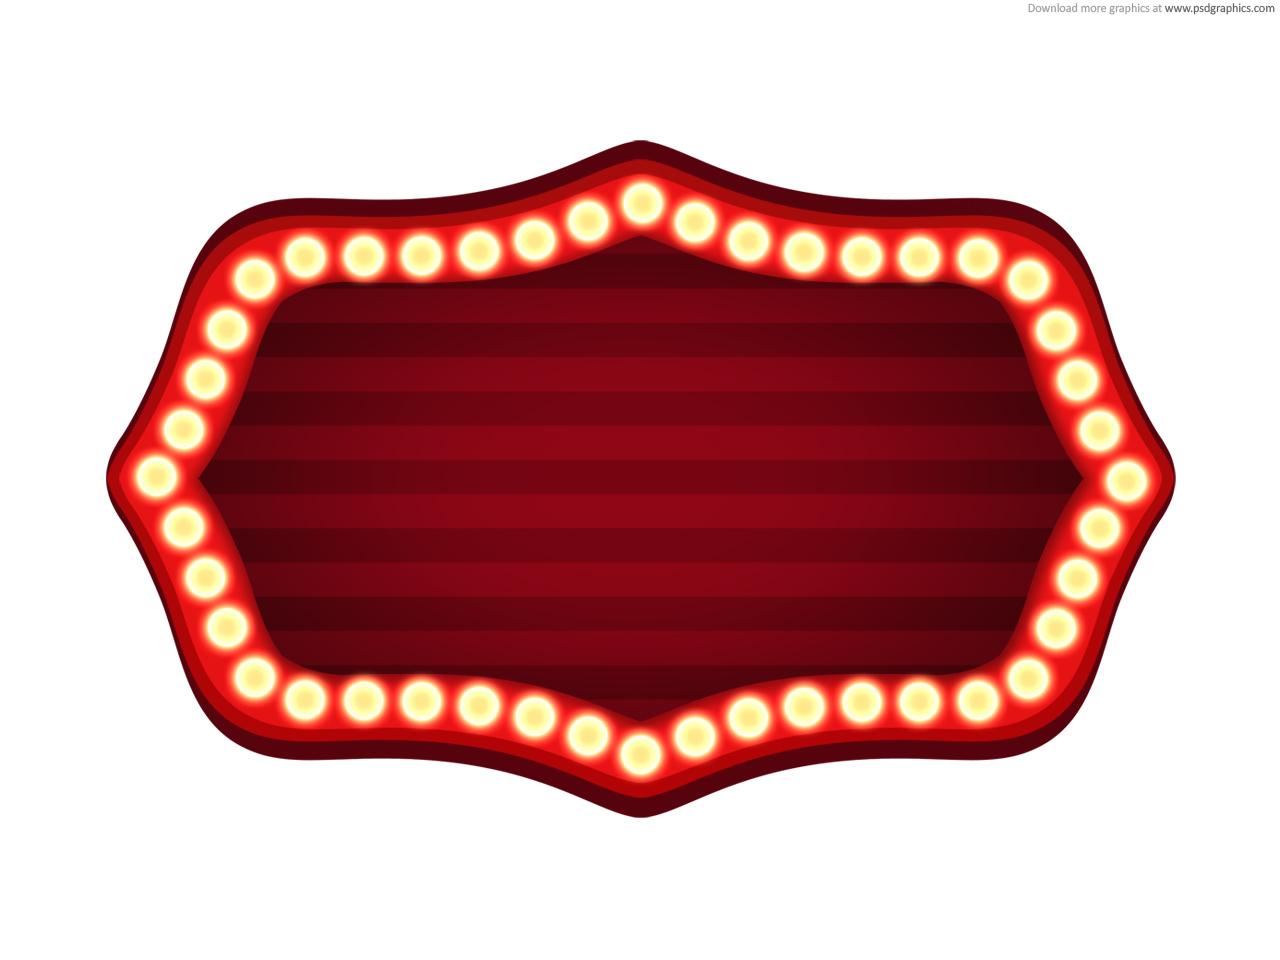 marquee clipart blank